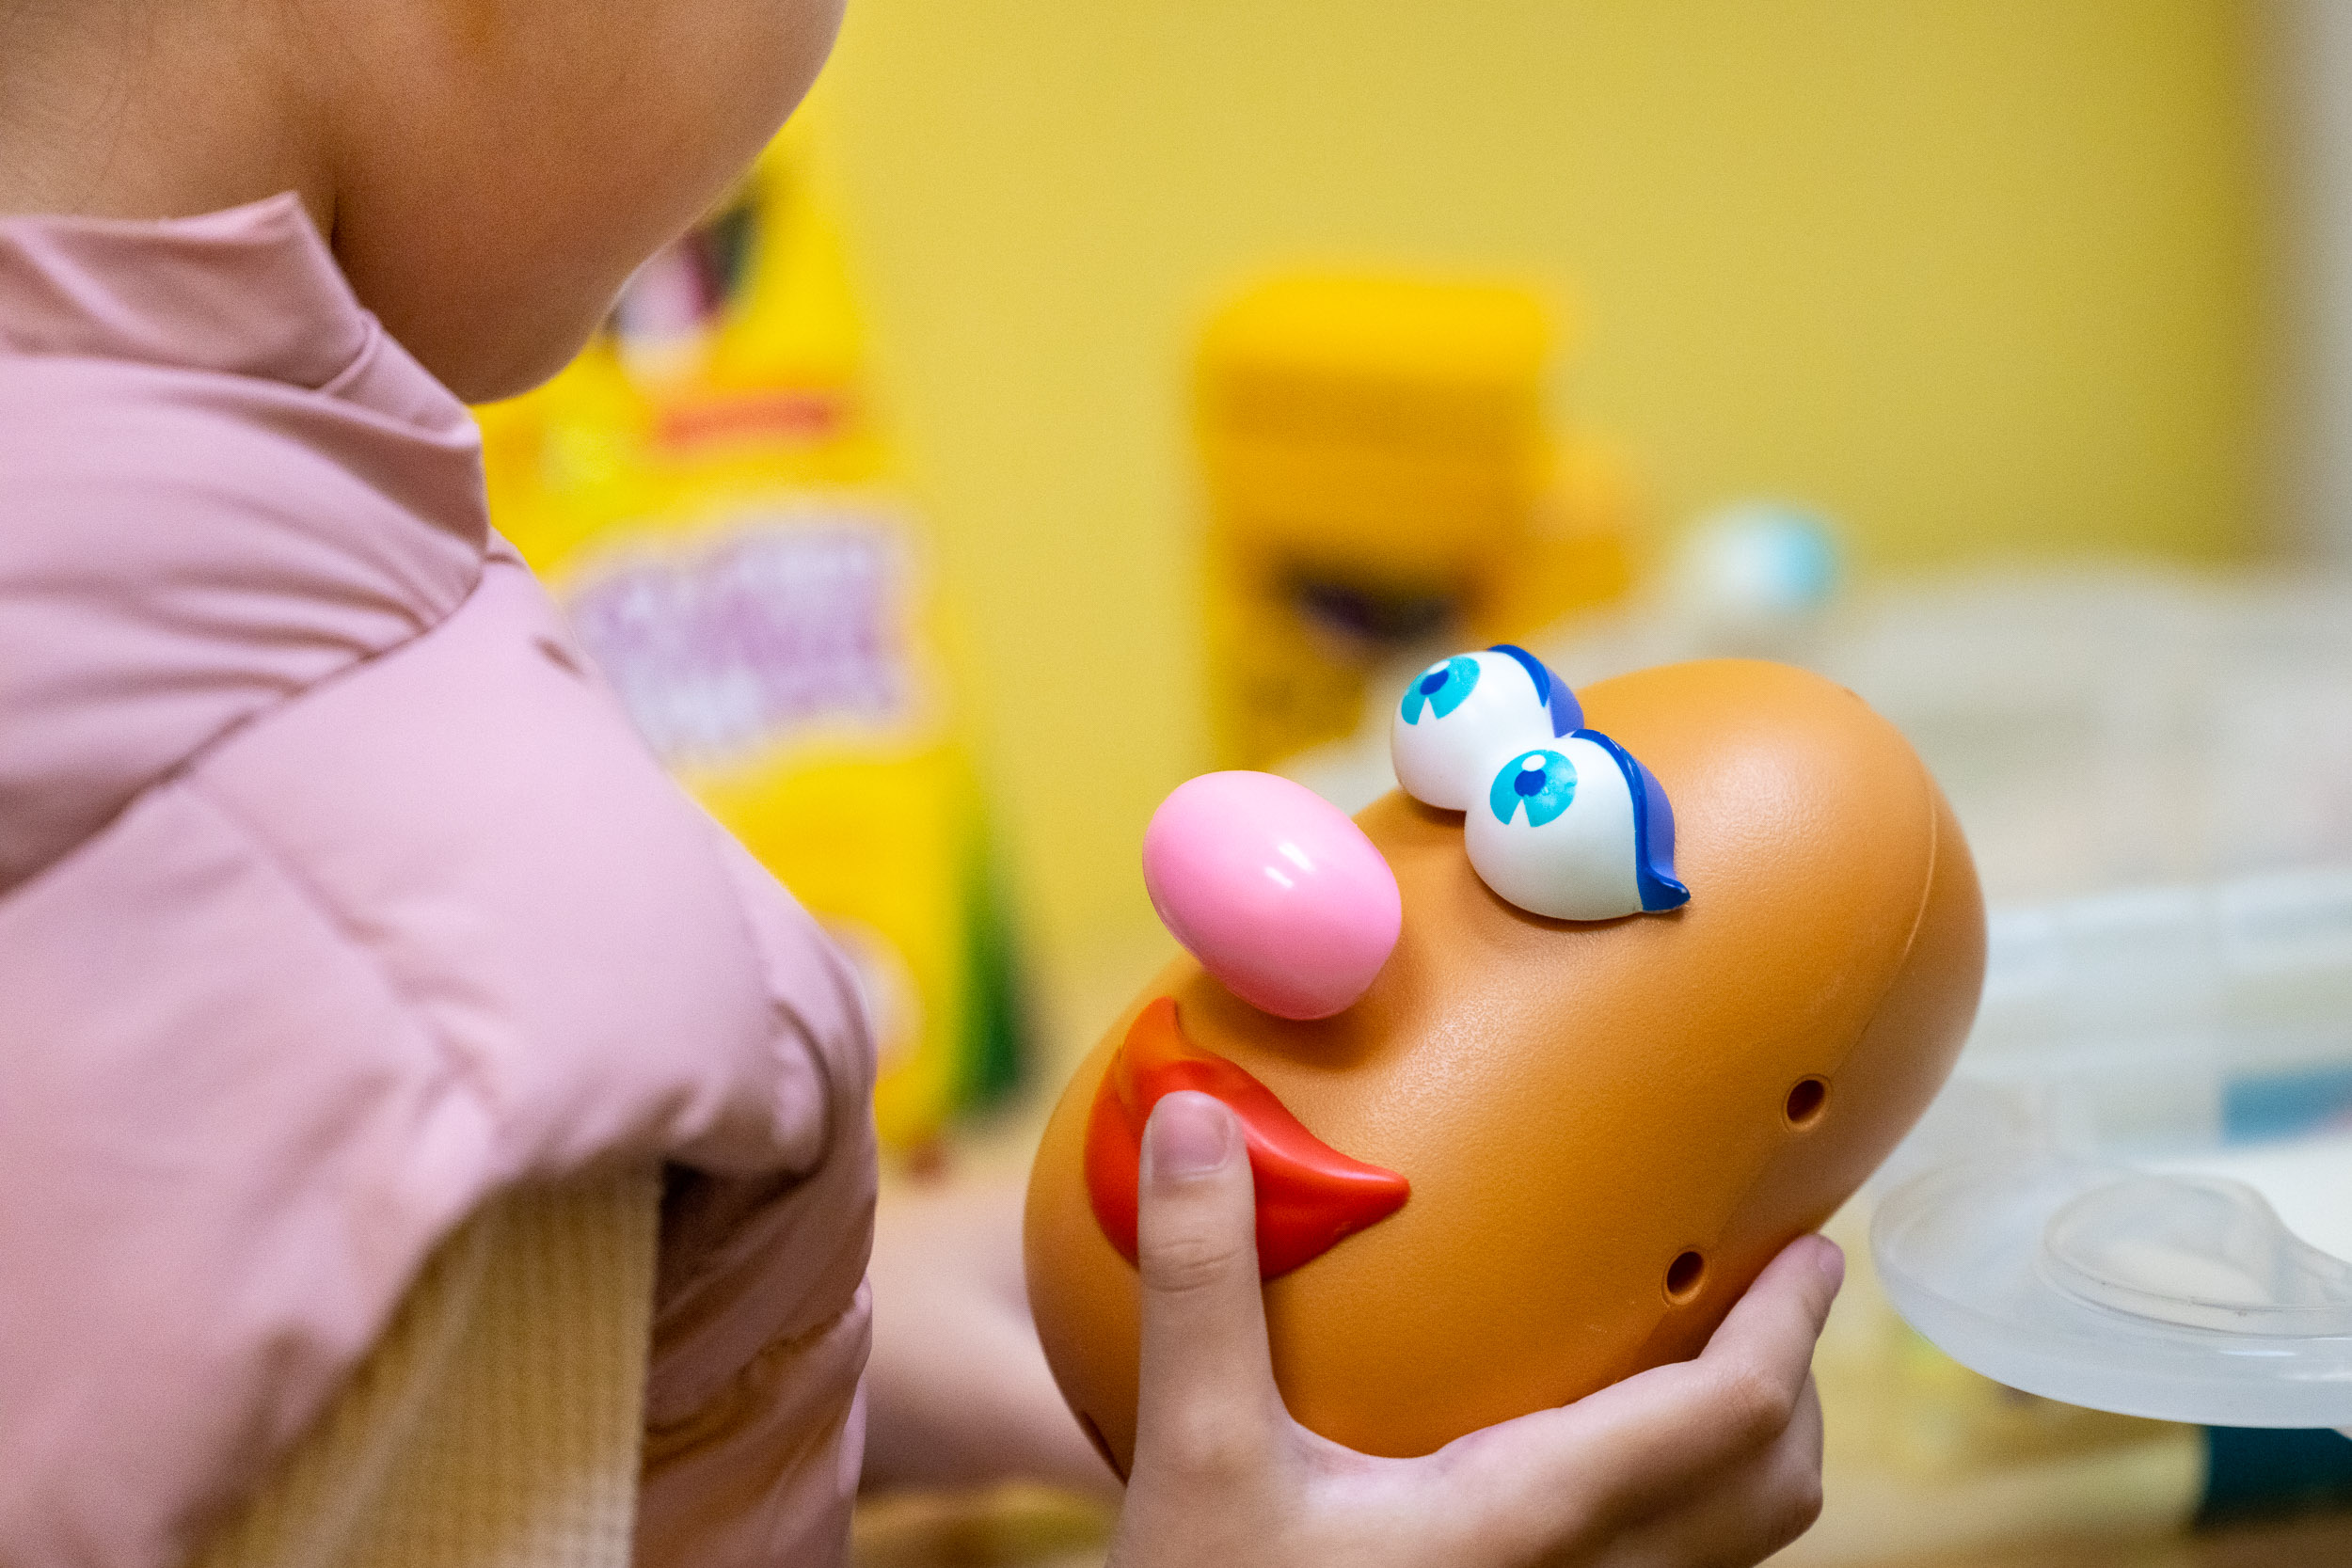 Child playing with Mr. Potato Head